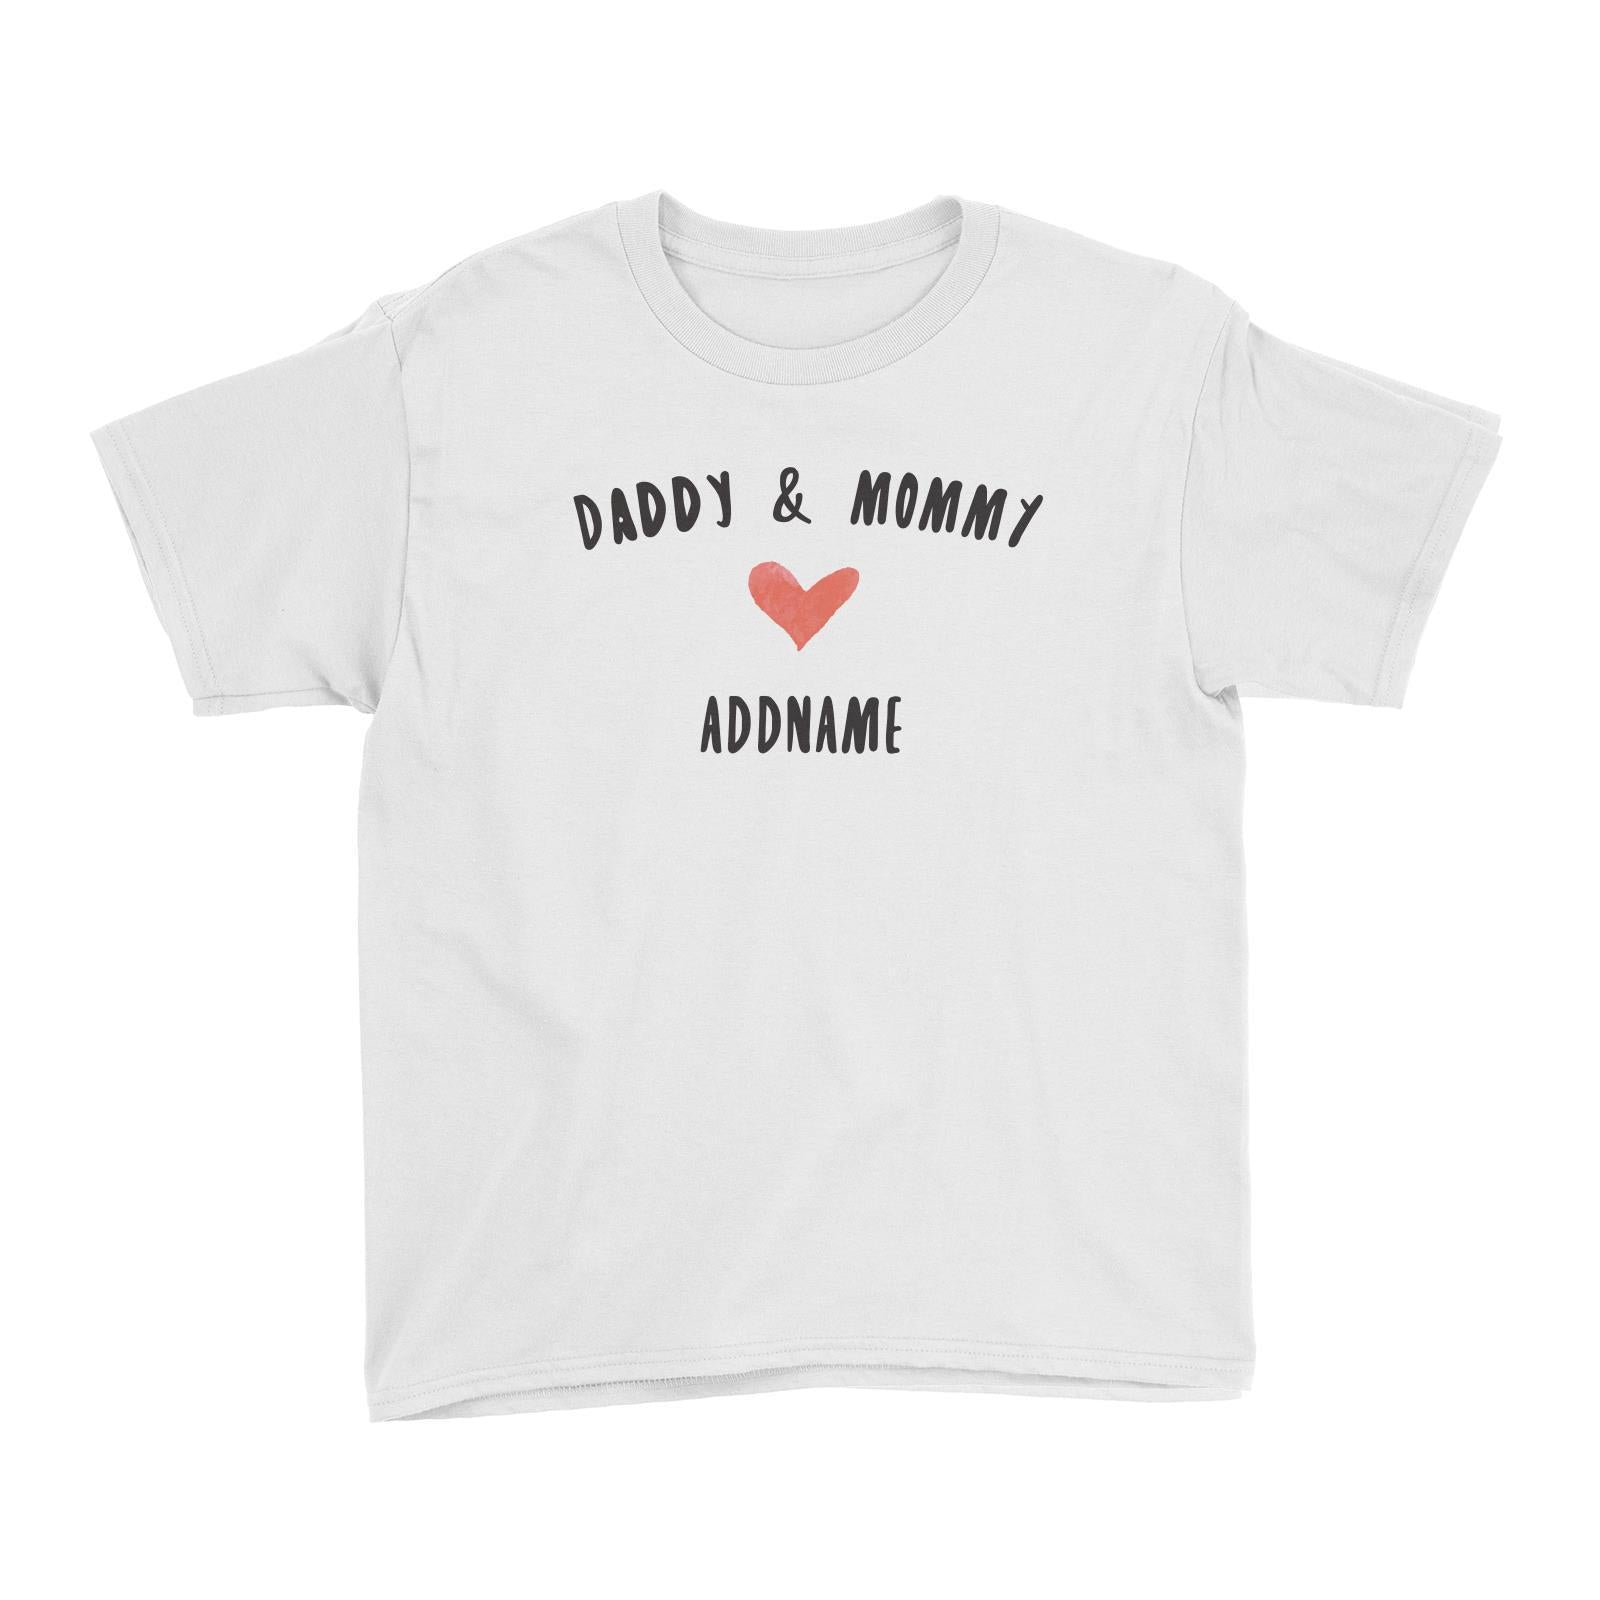 Daddy & Mommy Love Addname Kid's T-Shirt  Matching Family Personalizable Designs